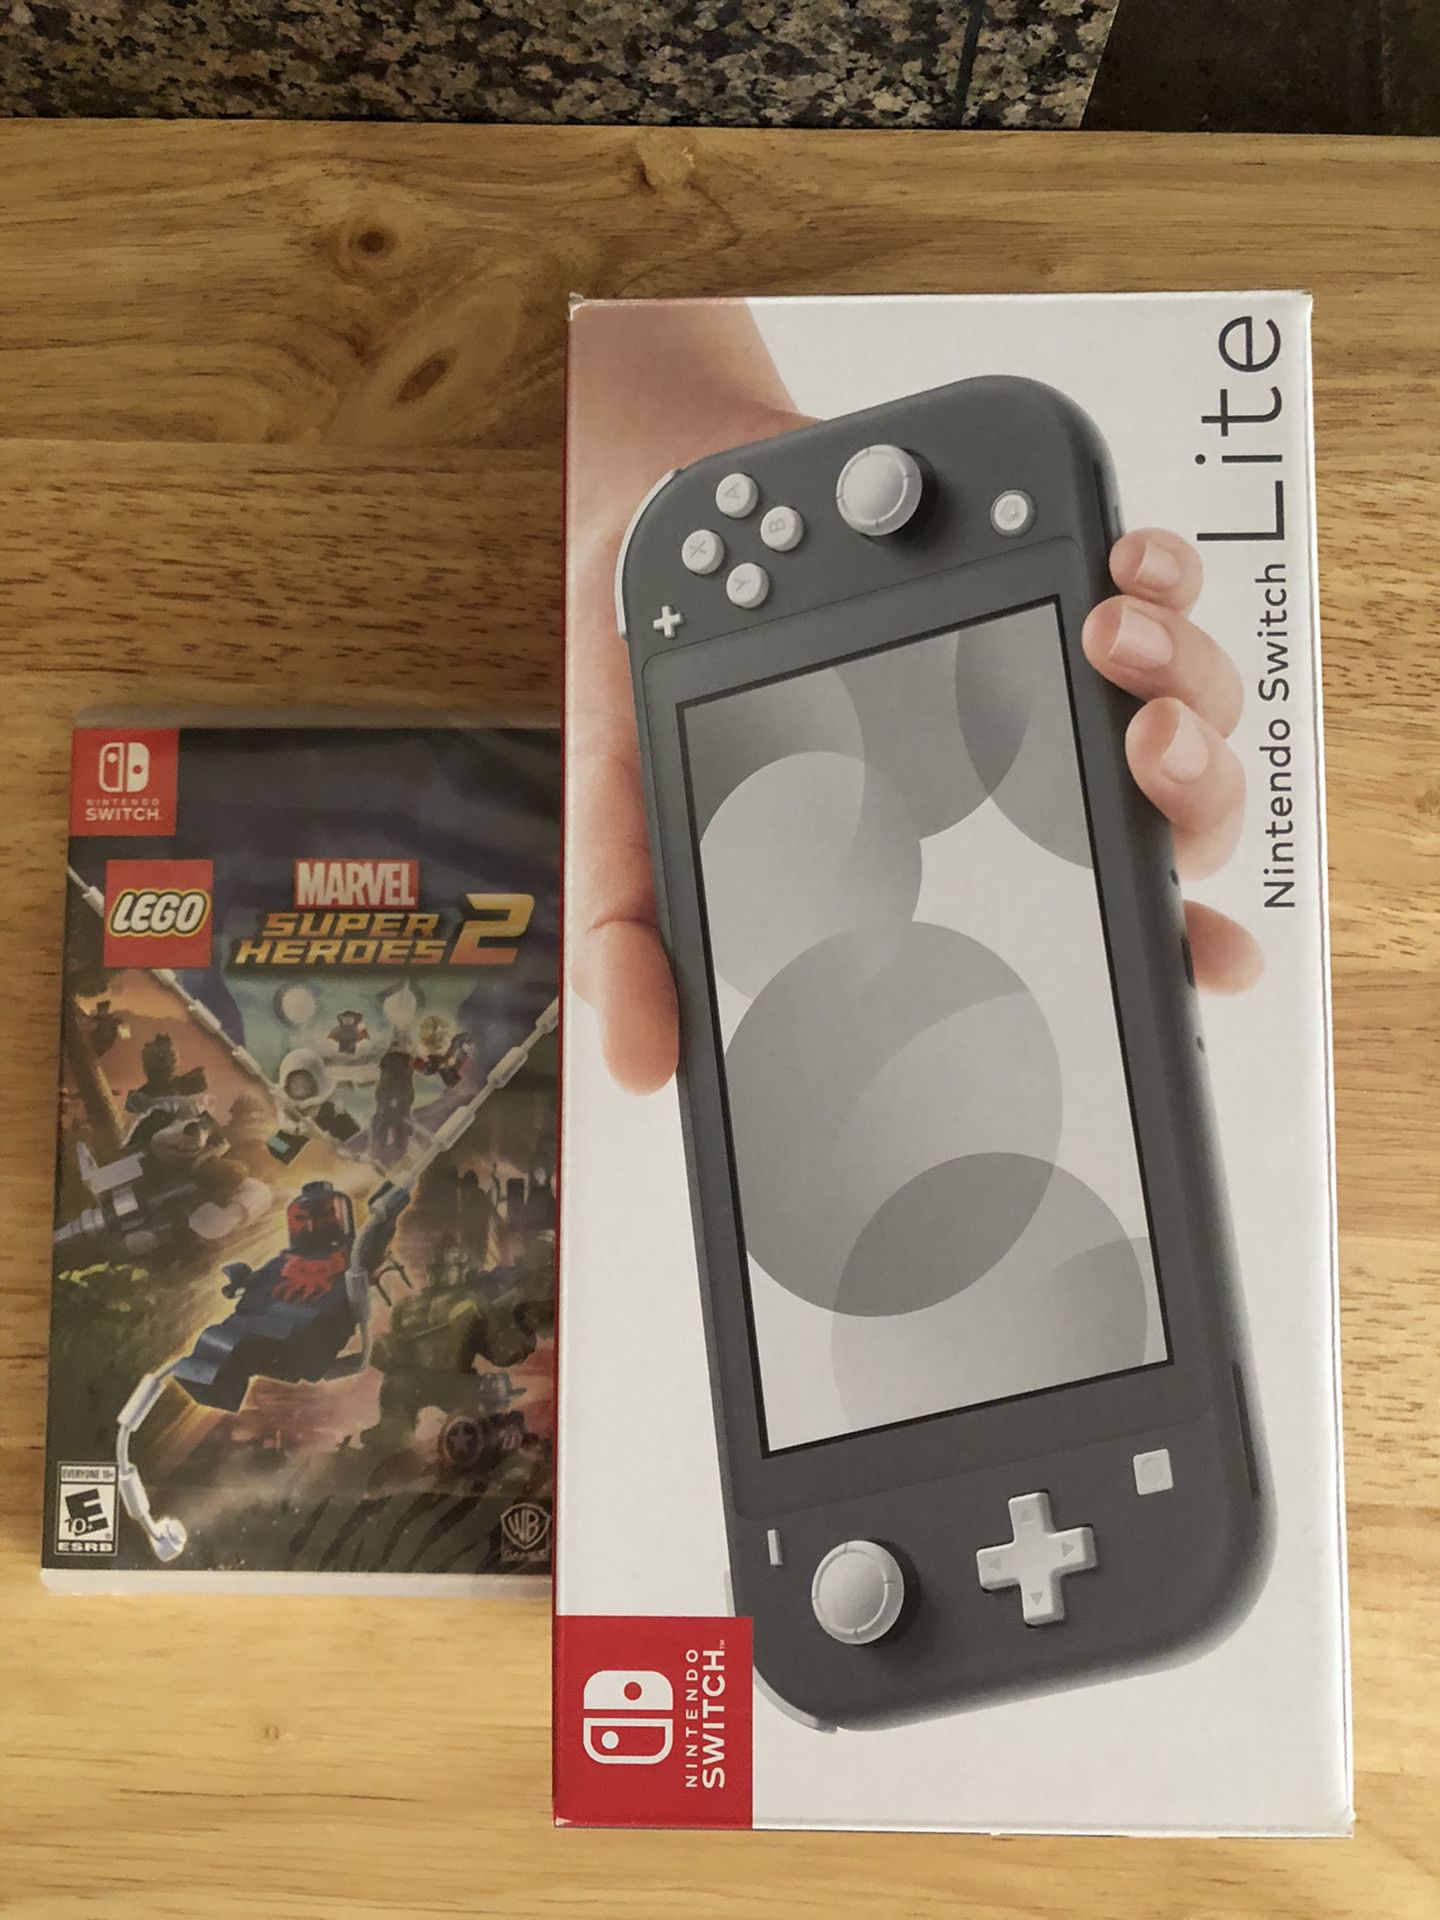 Brand new Nintendo Switch Lite and game